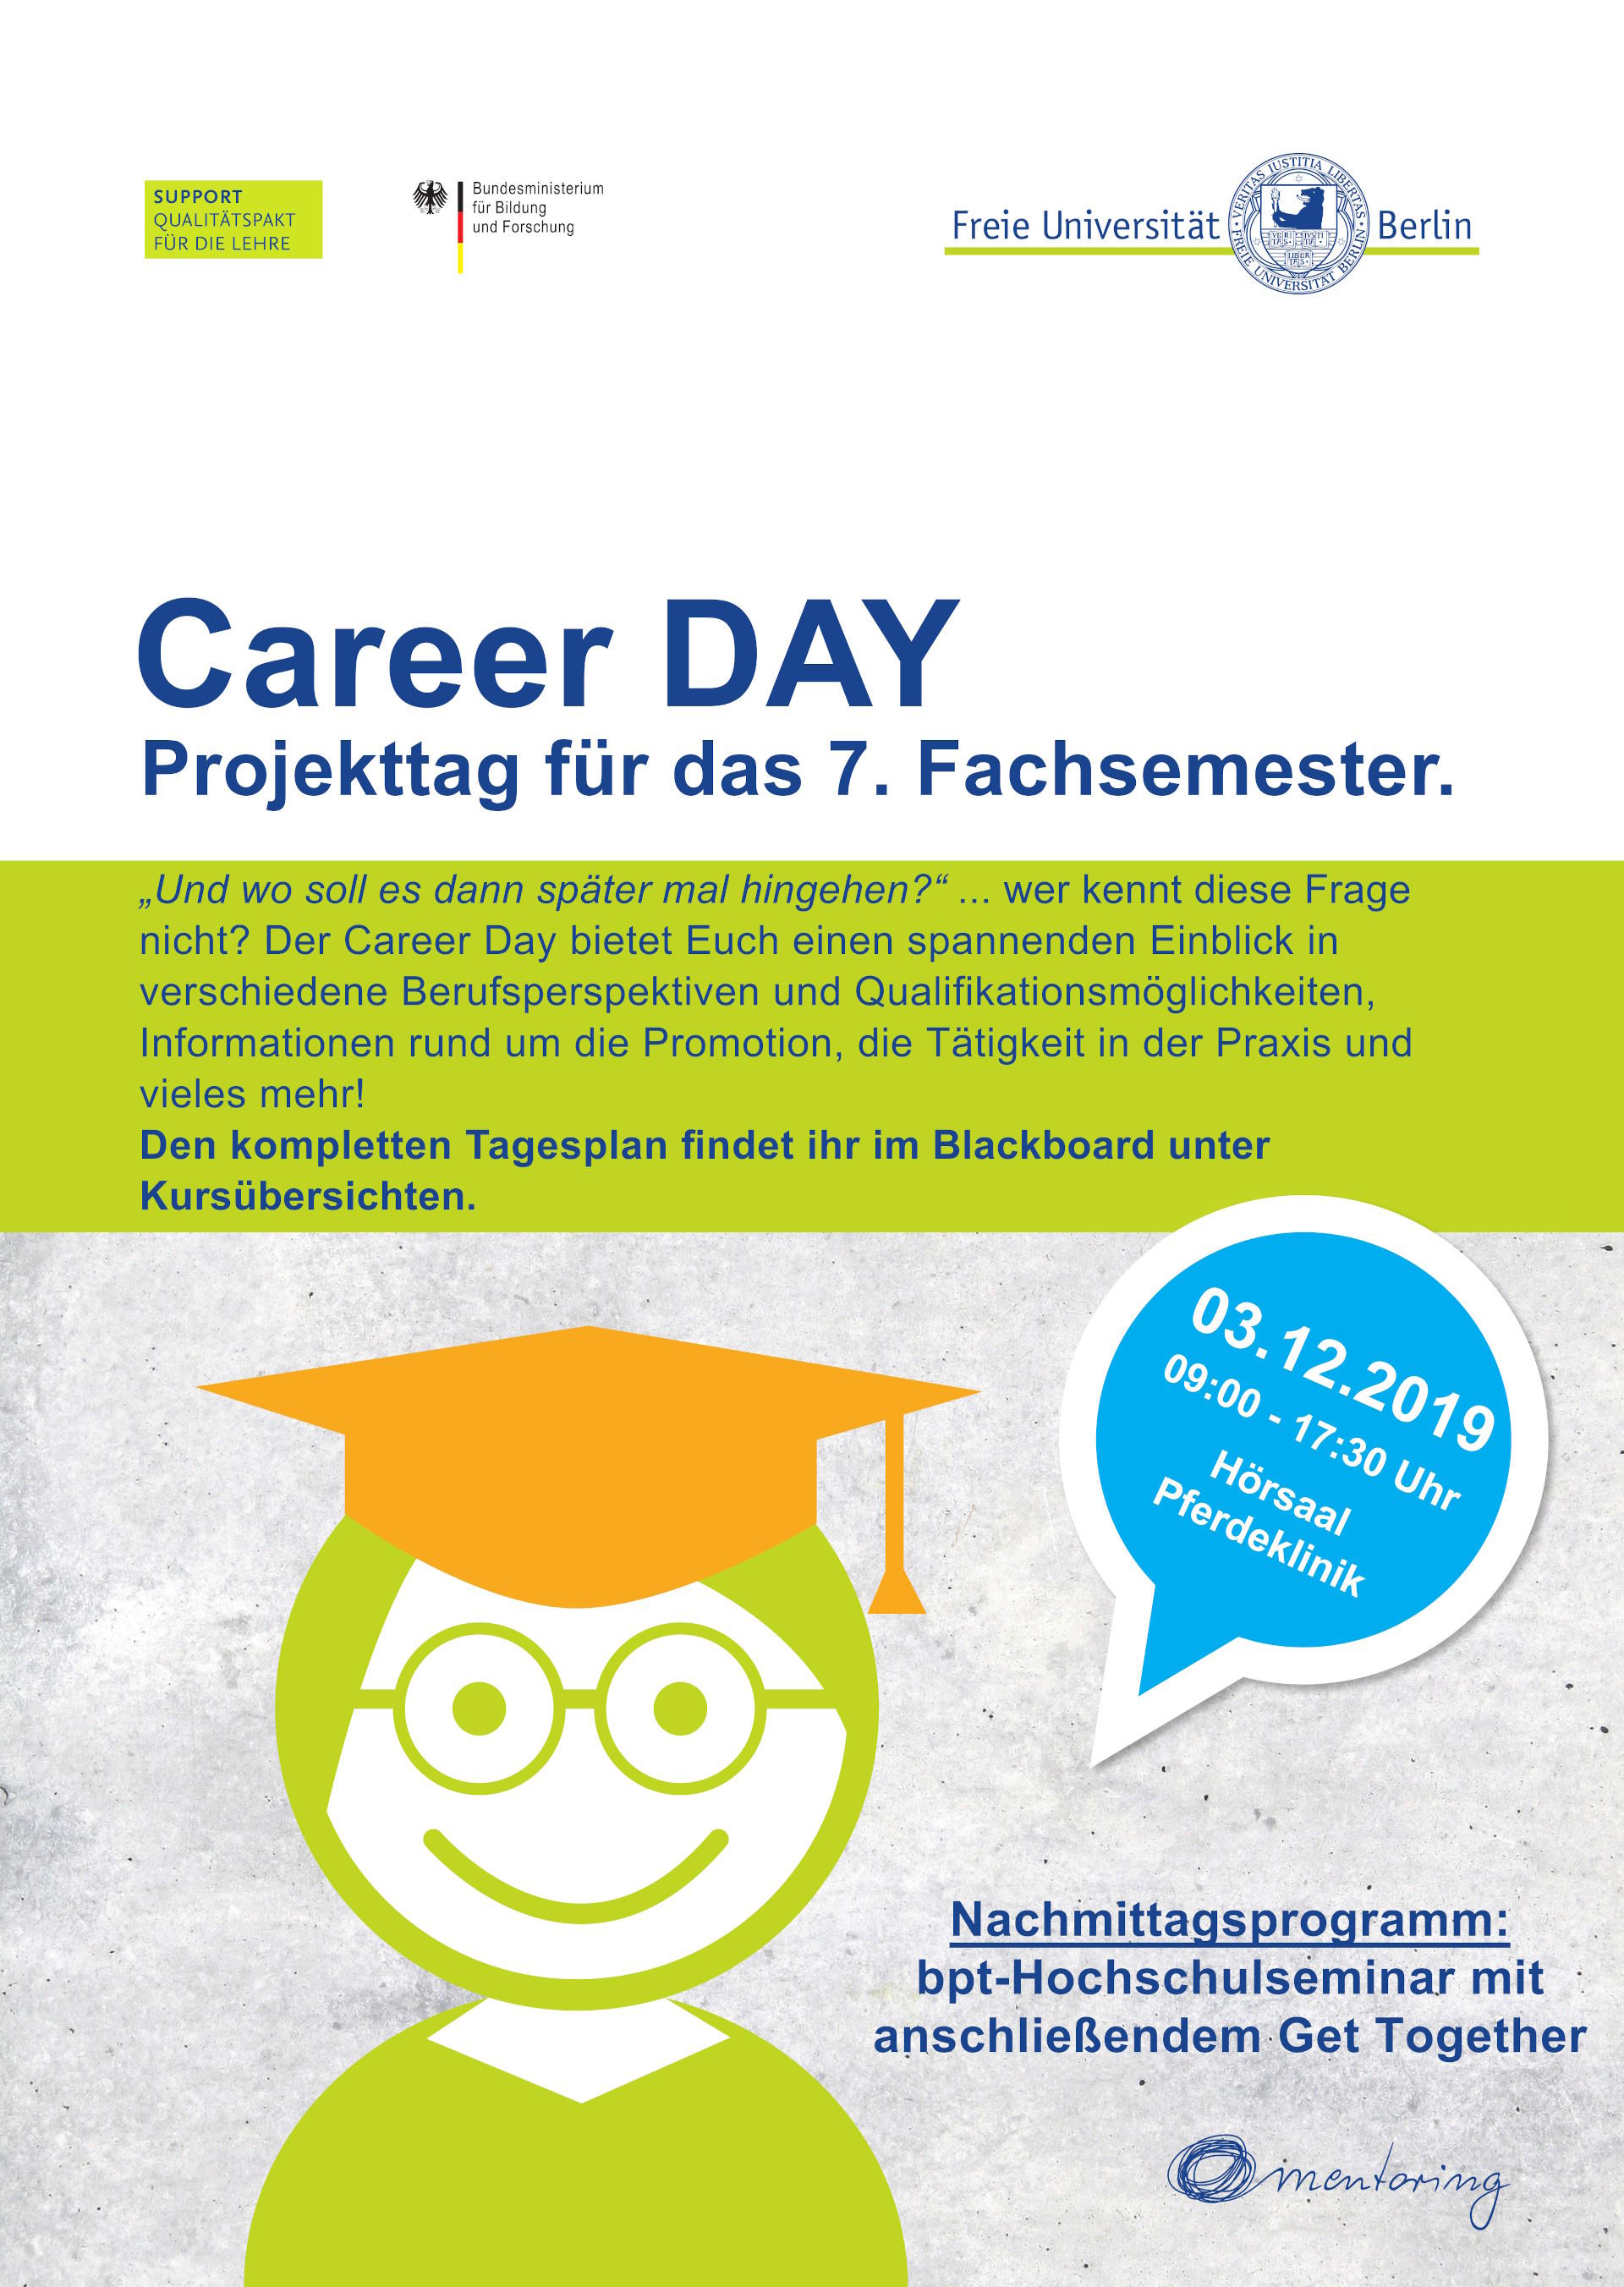 2019_career_day_poster-bmp